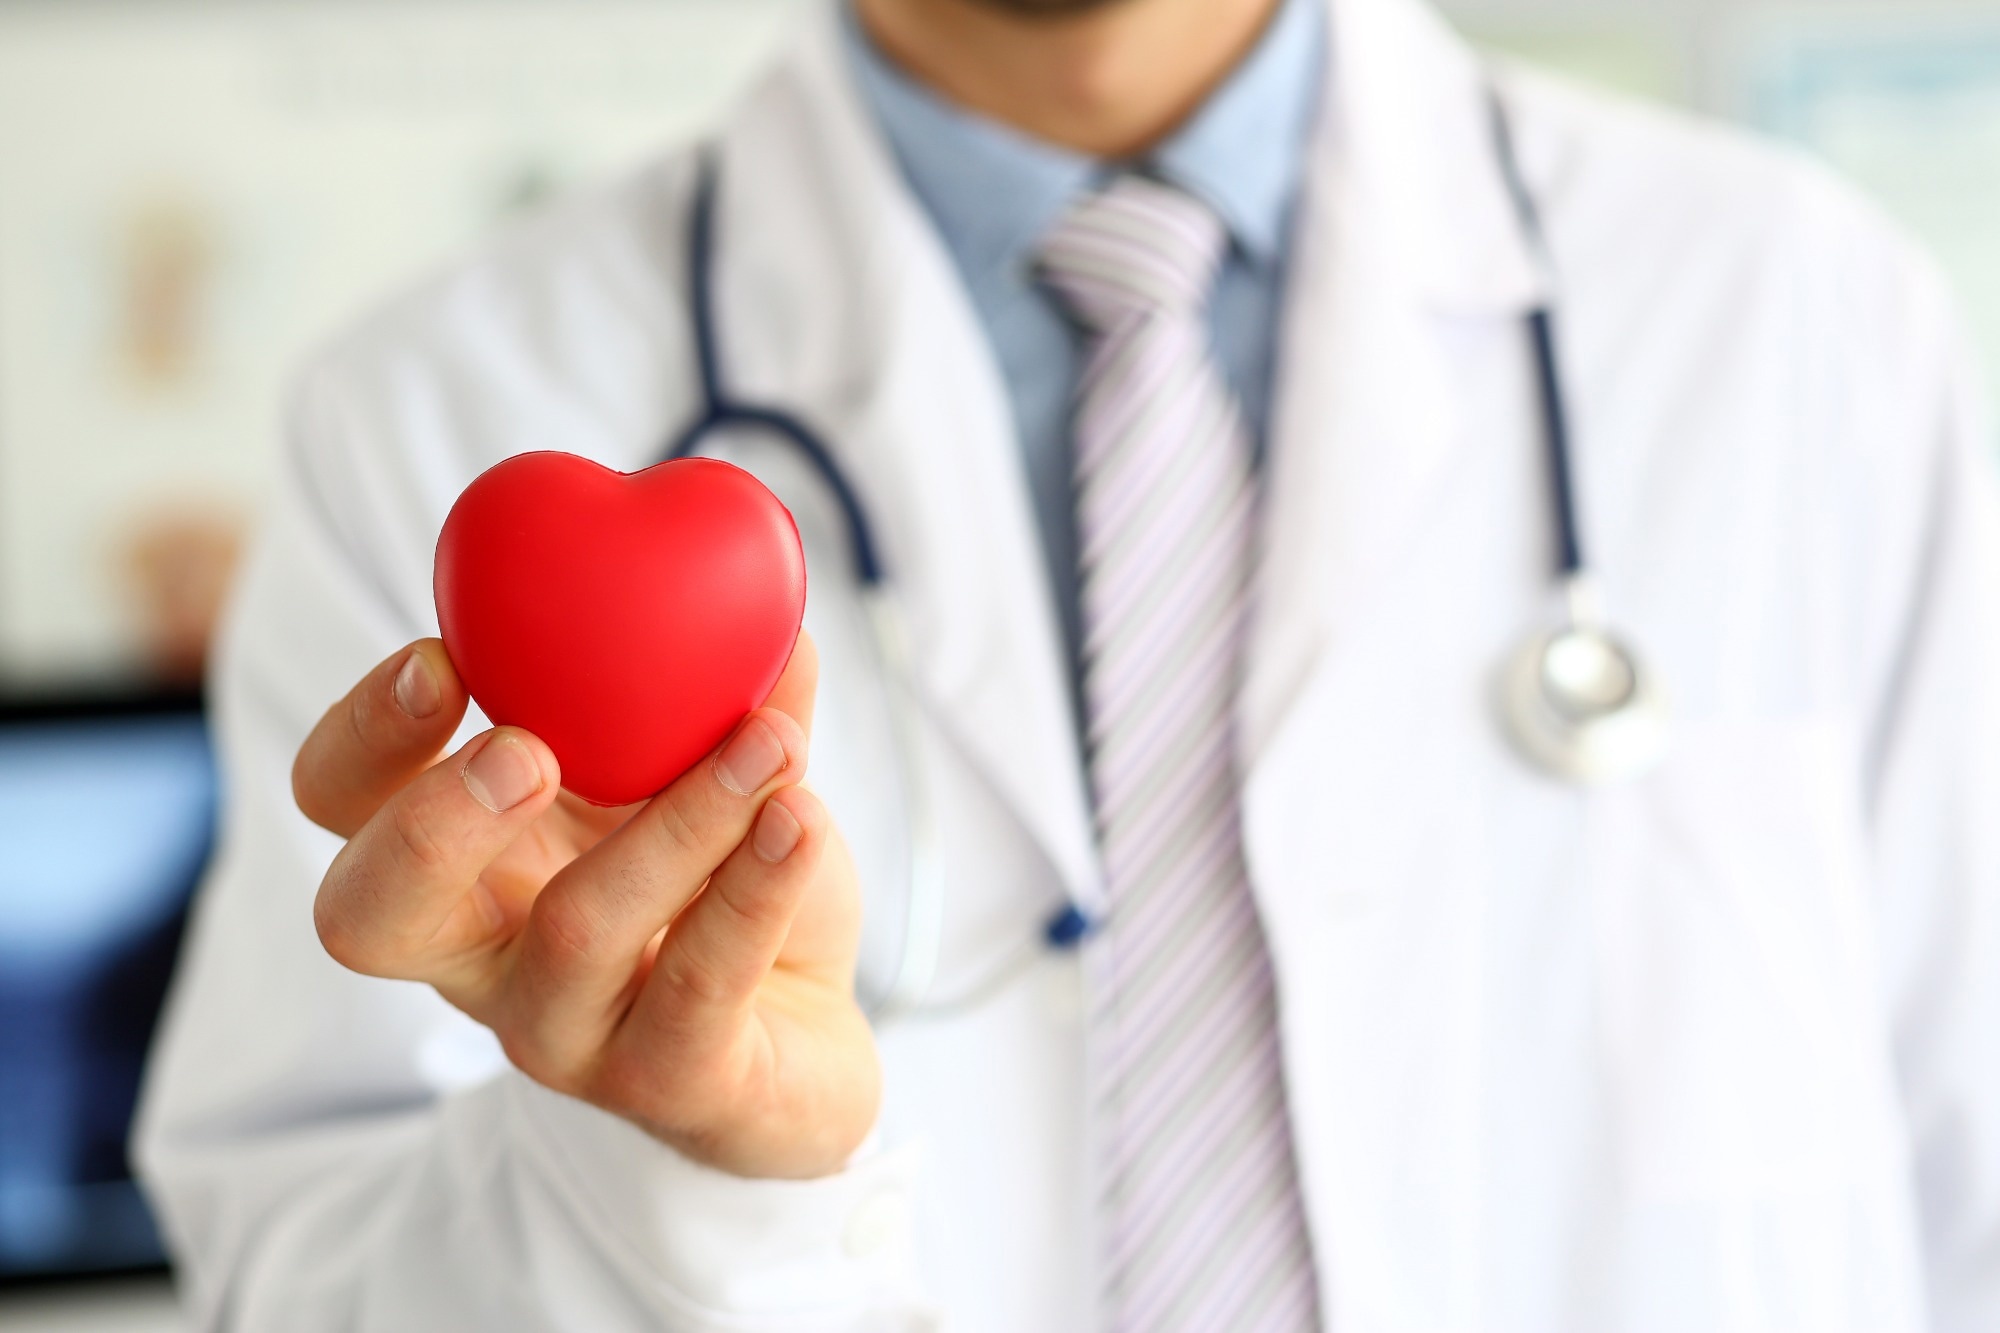 Study: Cardiovascular disease and all-cause mortality associated with individual and combined cardiometabolic risk factors. Image Credit: H_Ko/Shutterstock.com